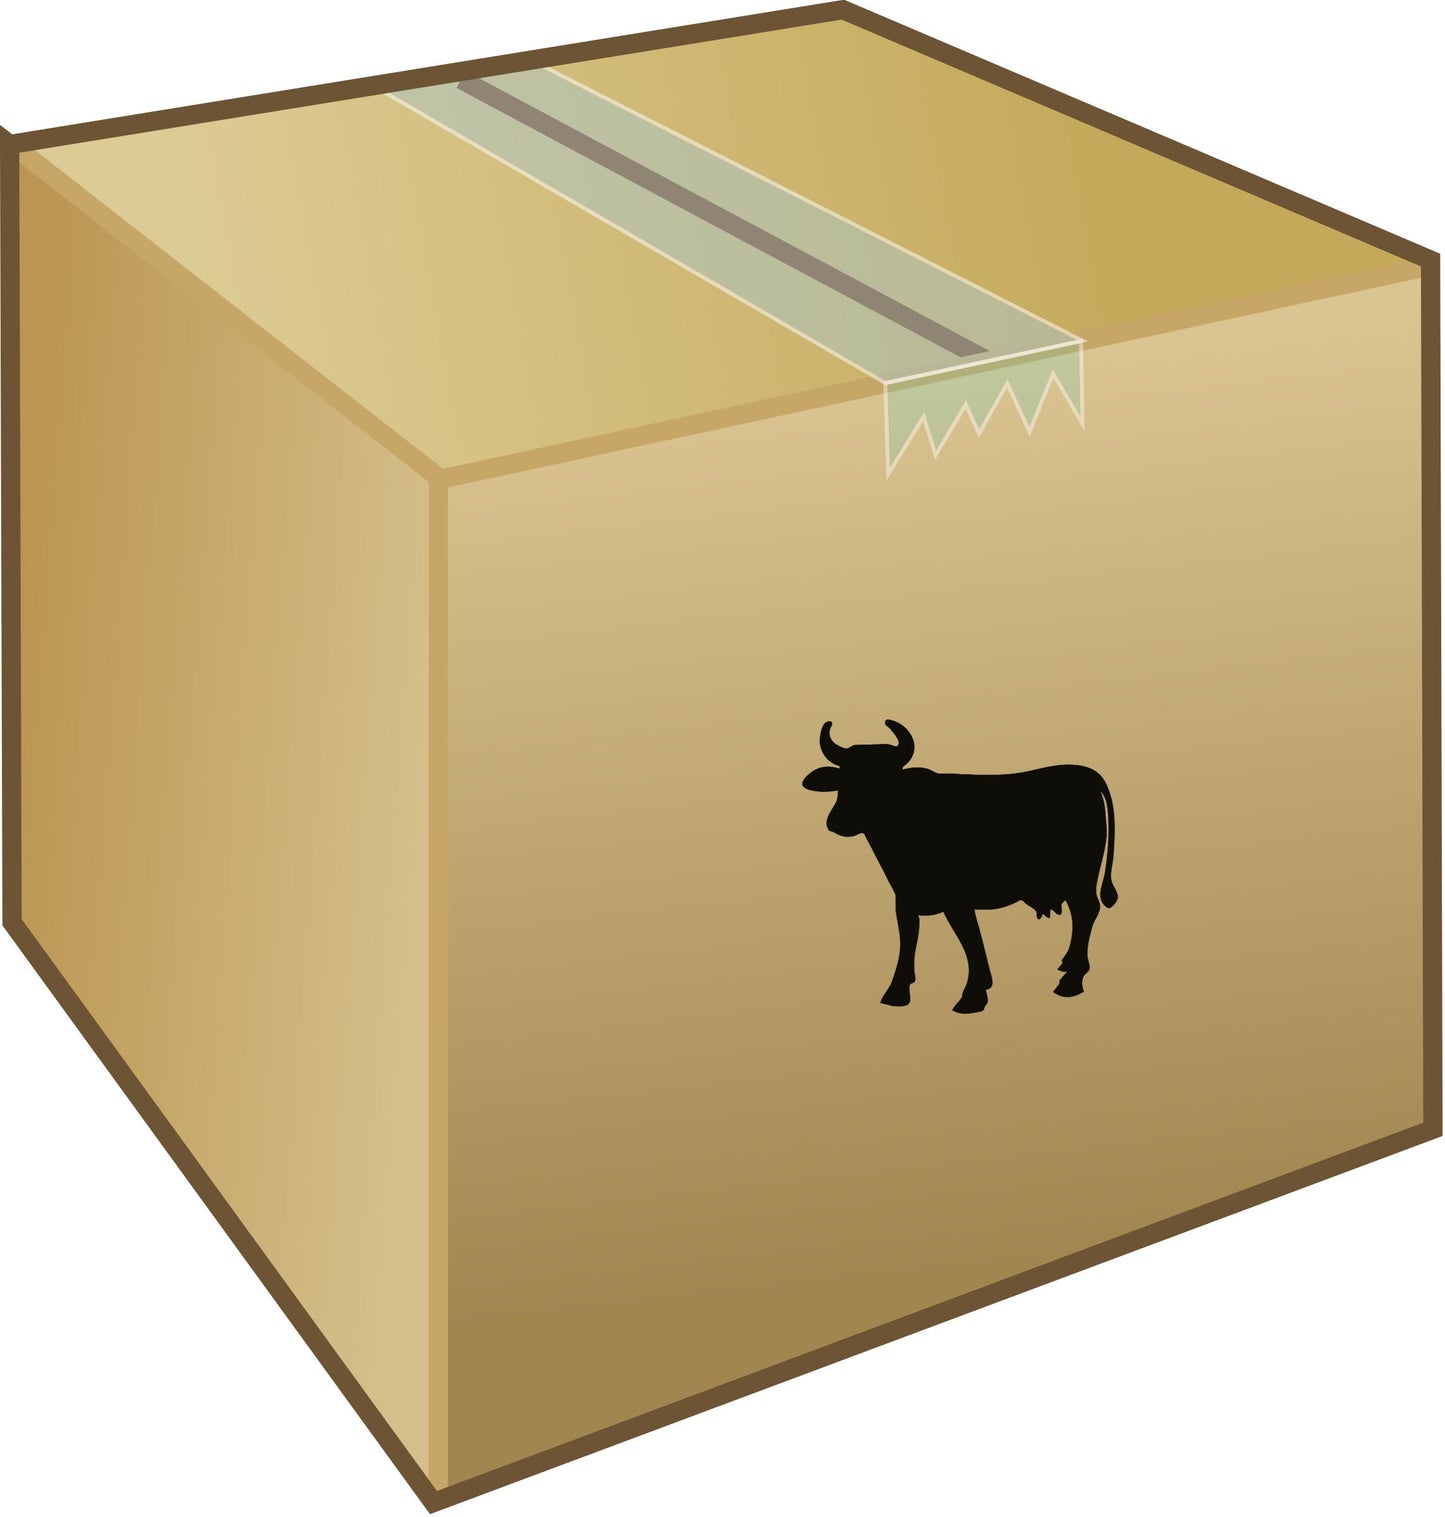 Beef Boxes - 50 LB's